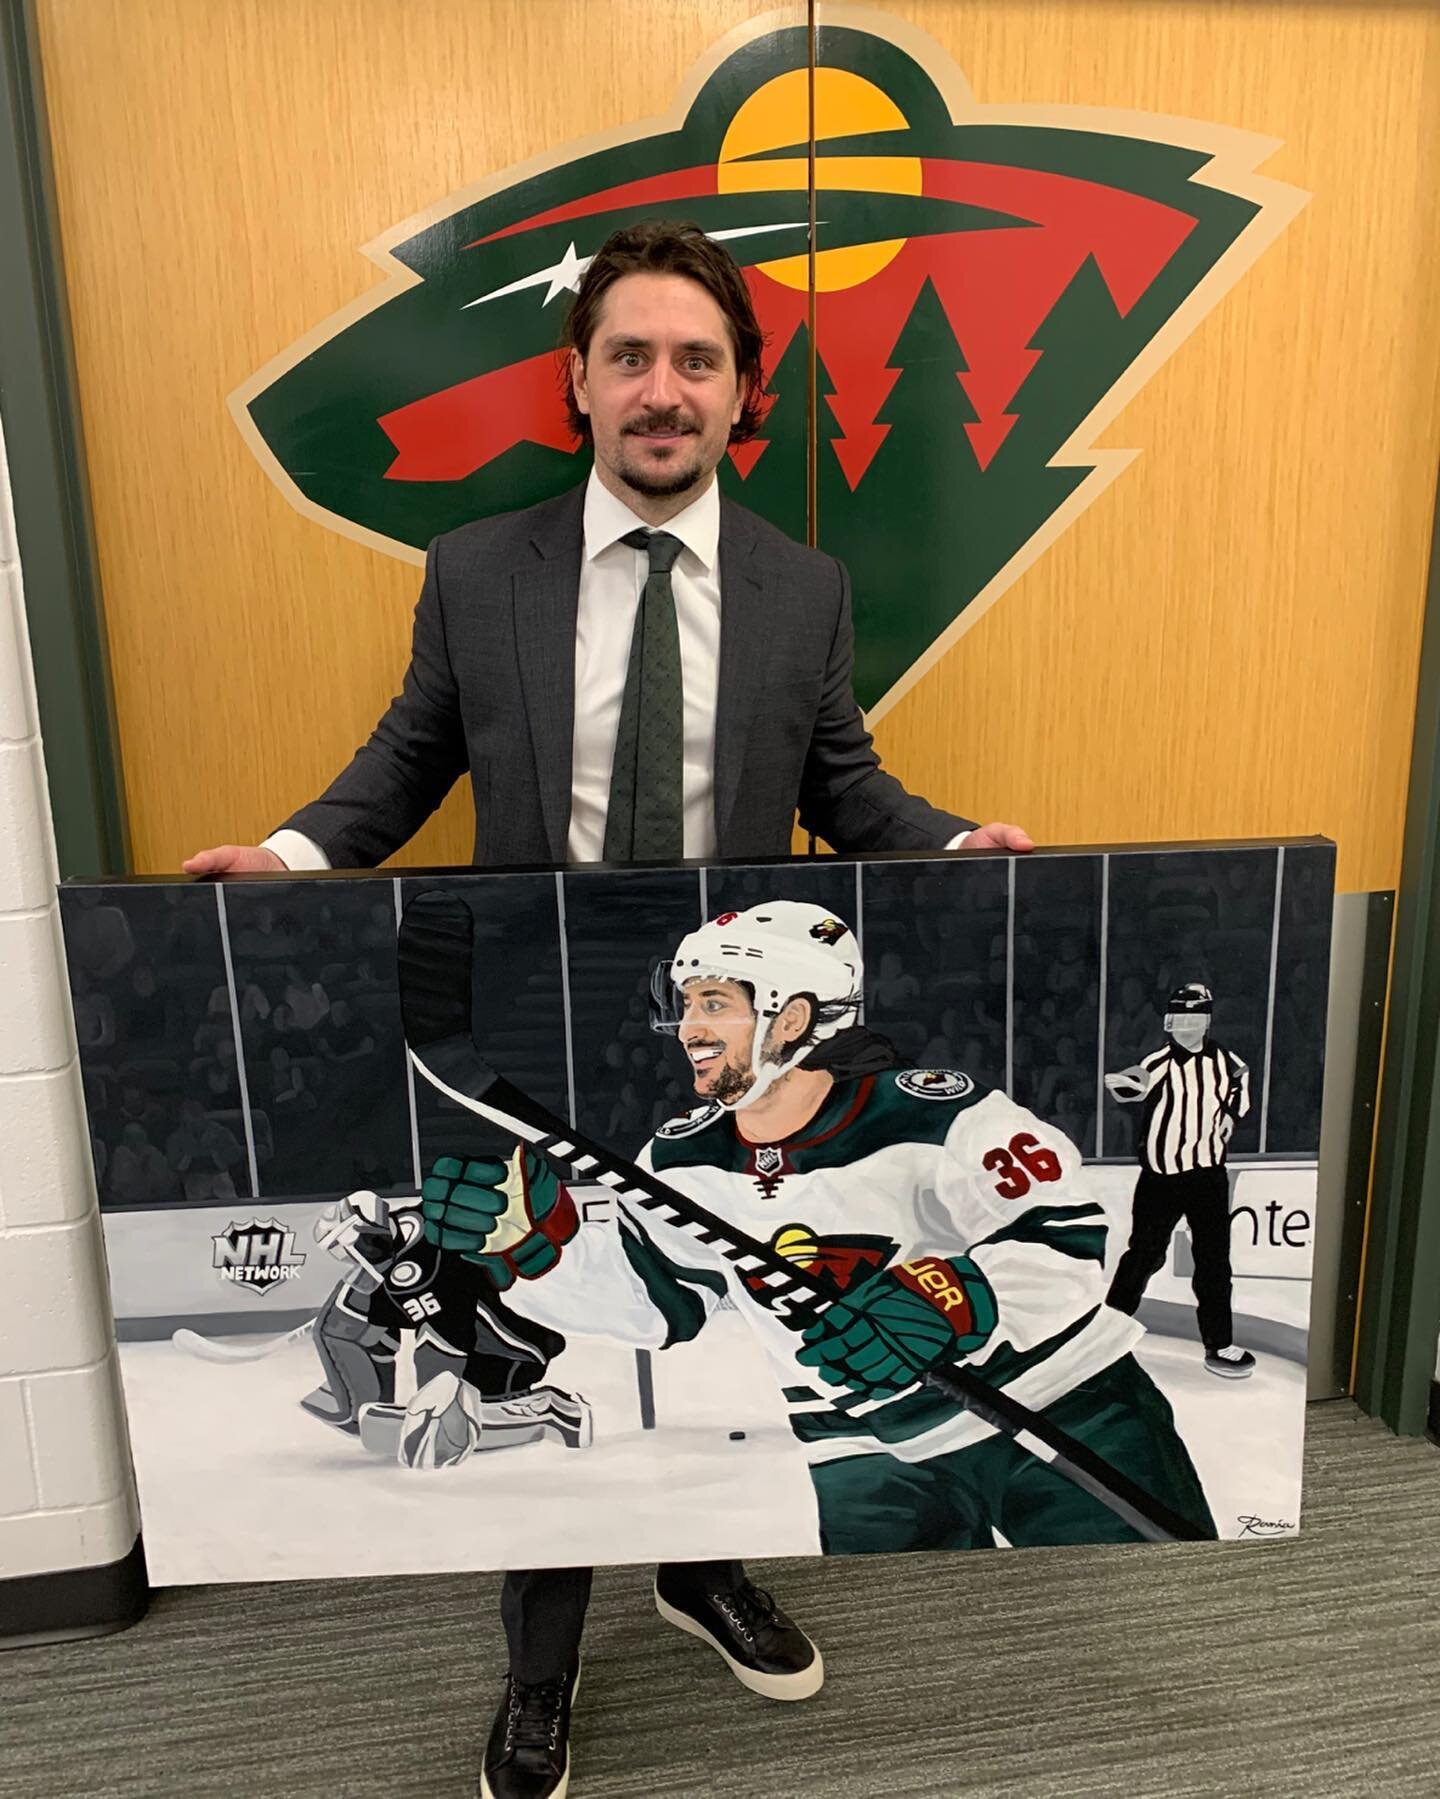 🏒 Sold | 2021 🏒

Piece for @matszuccarello - One of the highlights of my art career and favorite player on @minnesotawild 🫶🏼